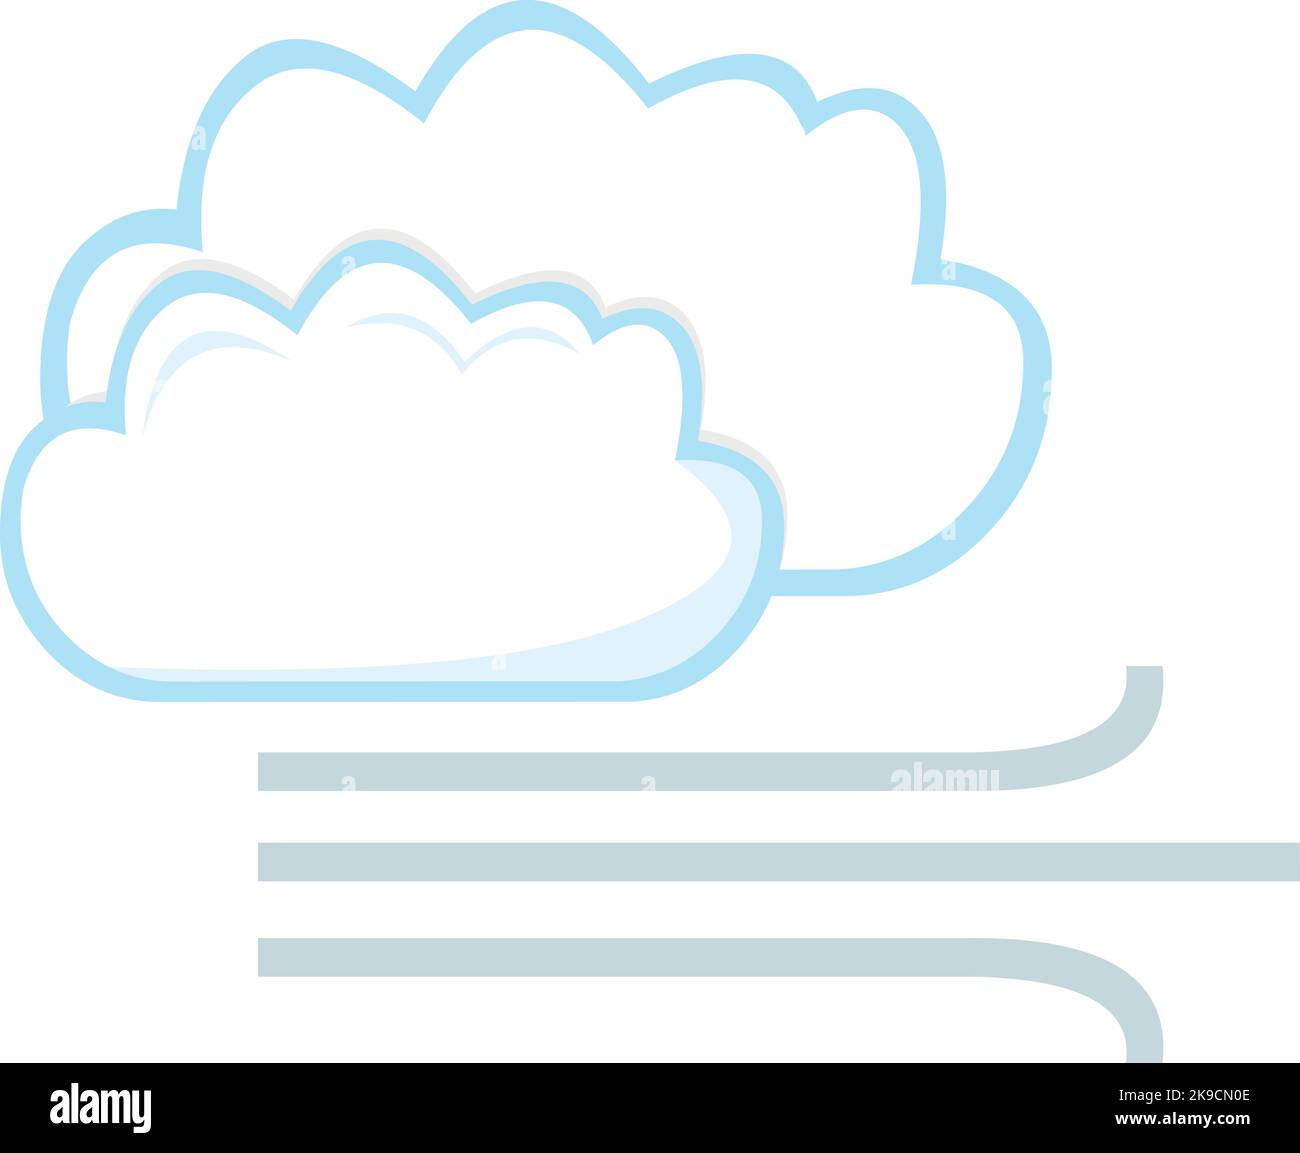 Windy Stock Vector Images - Alamy